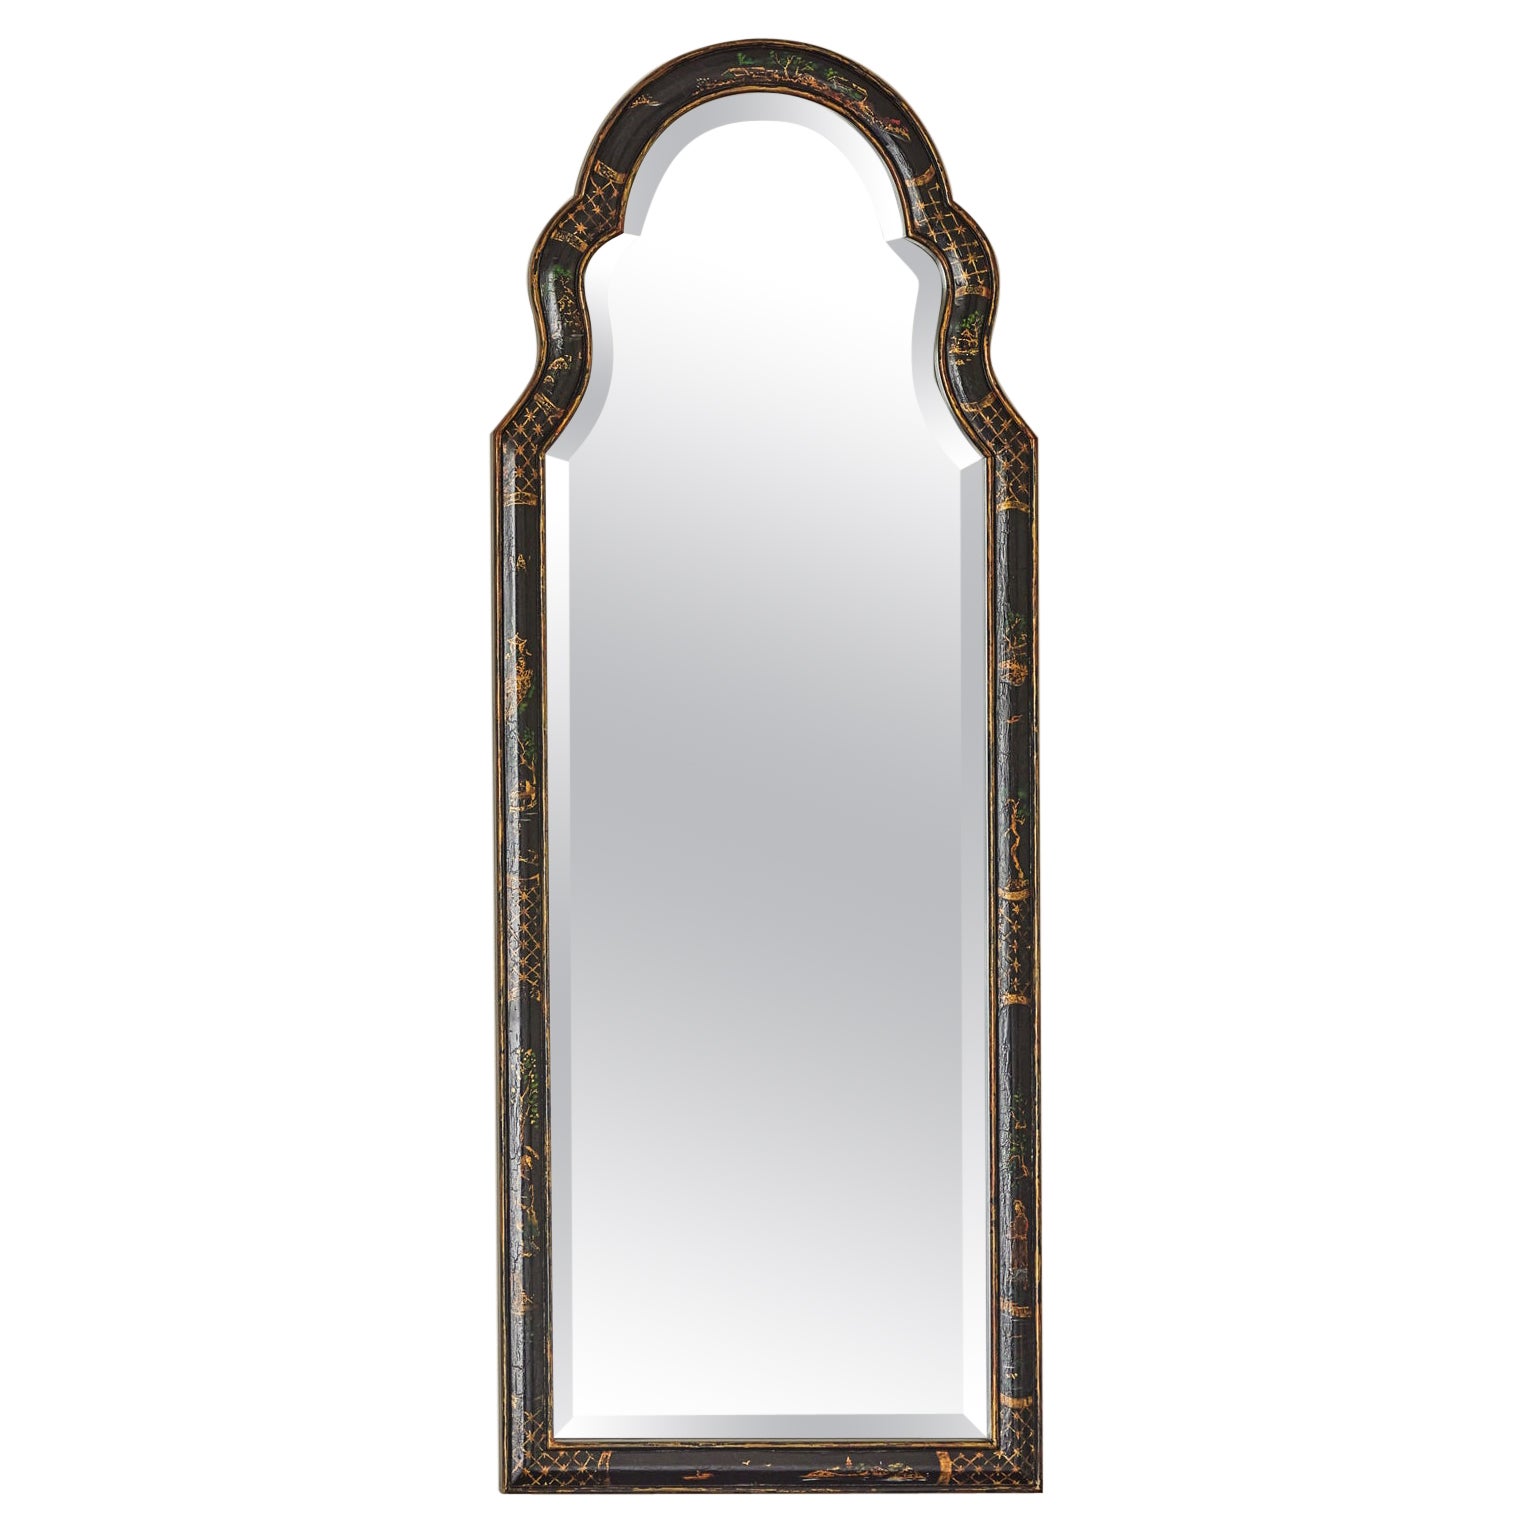 Chinoiserie Mirror "George" by the Hollis Collection For Sale